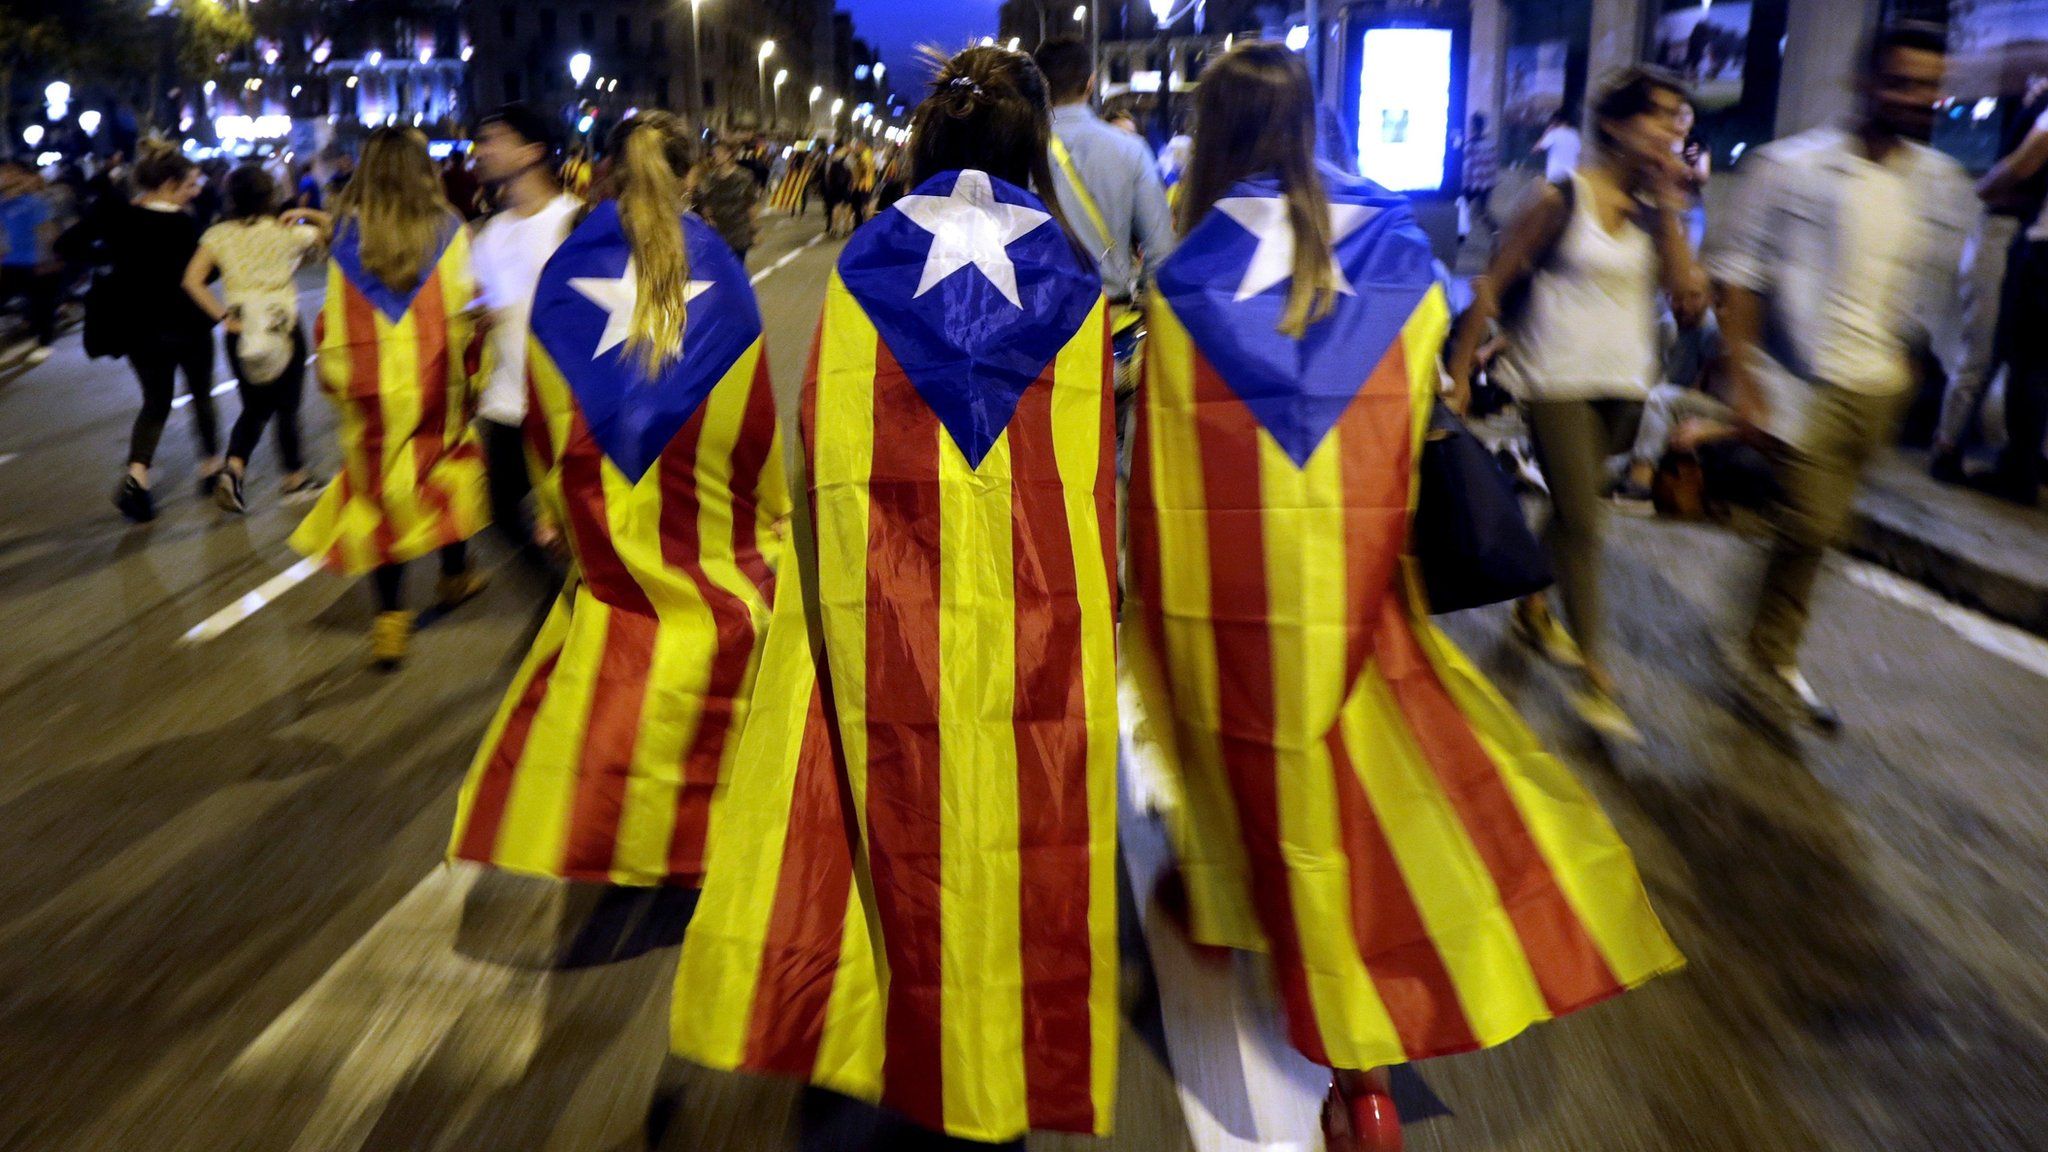 People wearing "Estelada" Catalan flags on their backs leave after taking part in a protest in Barcelona (3 October 2017)